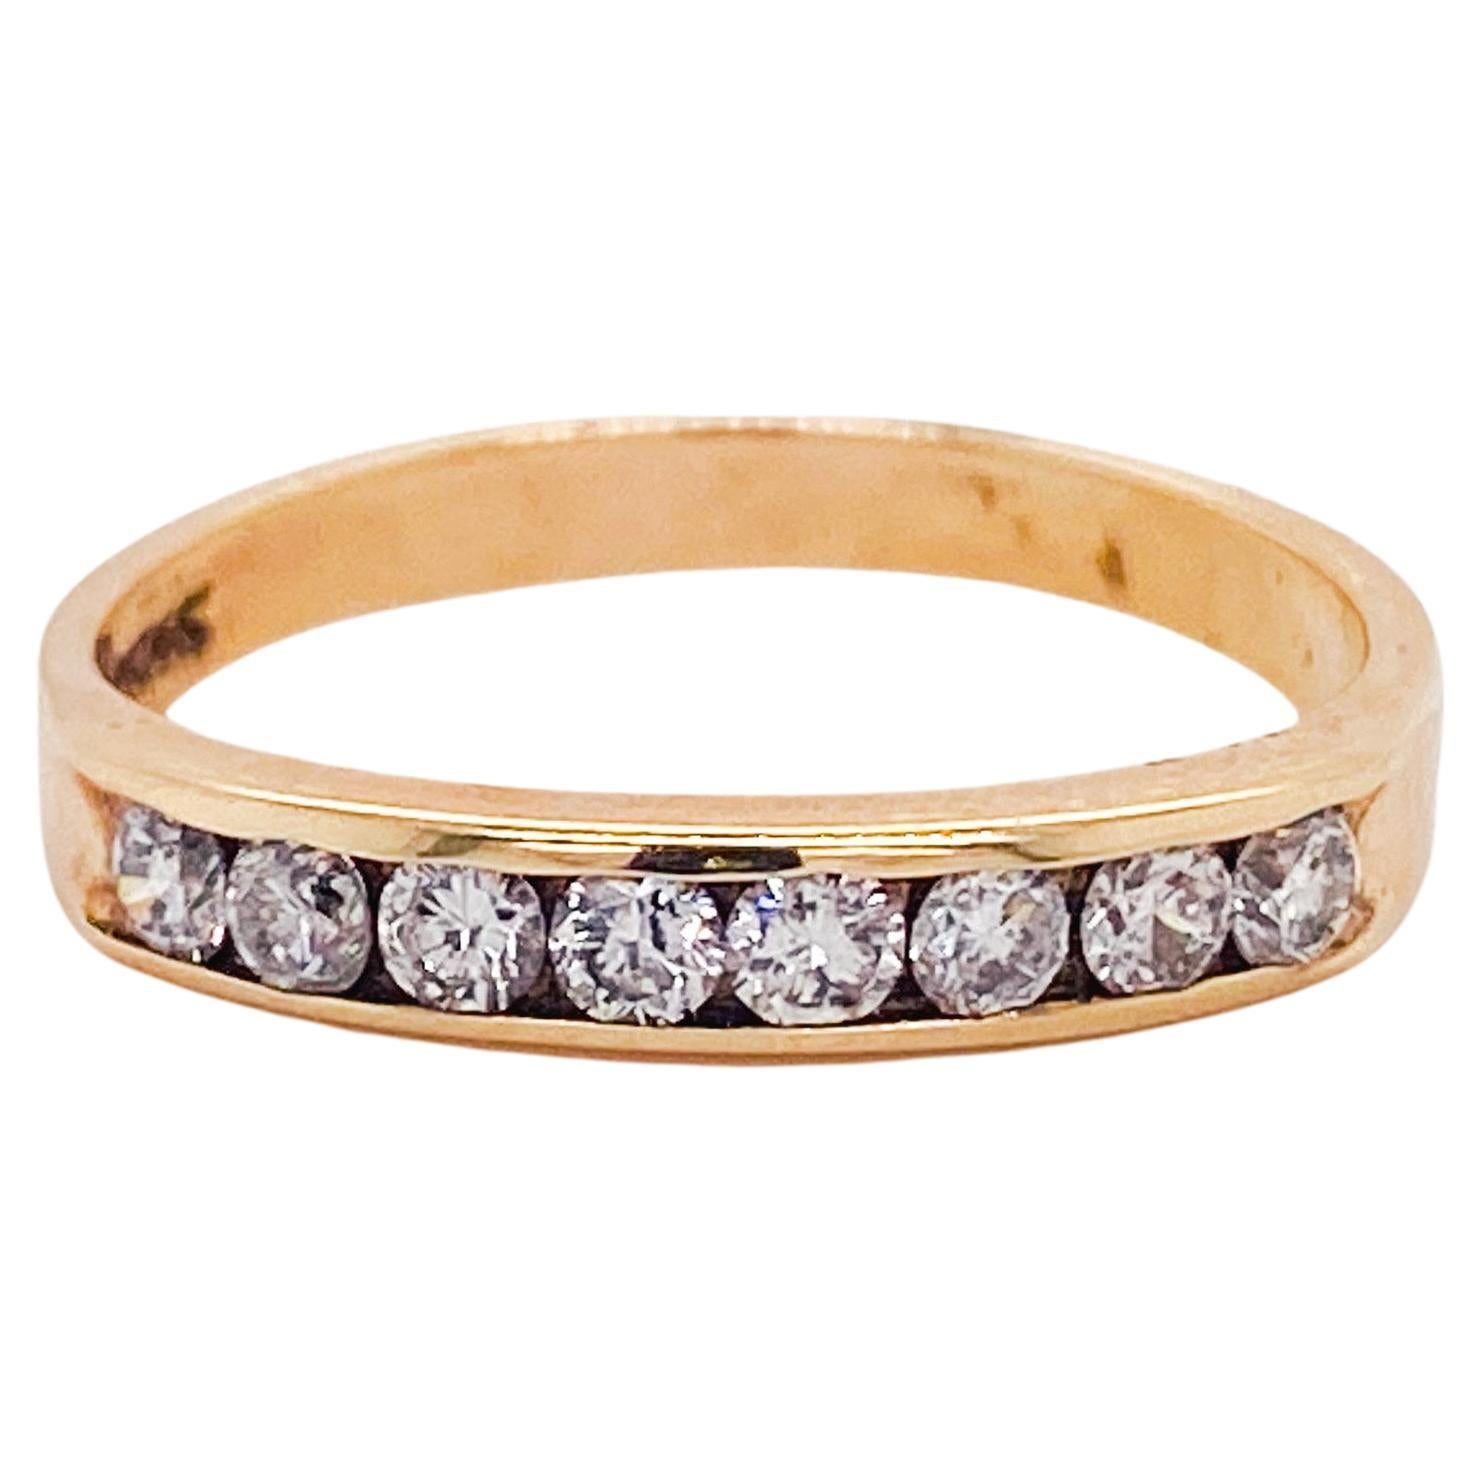 Diamond Channel Stackable Band, 0.25 Carat Diamonds, 14k Yellow Gold, Taper Fit